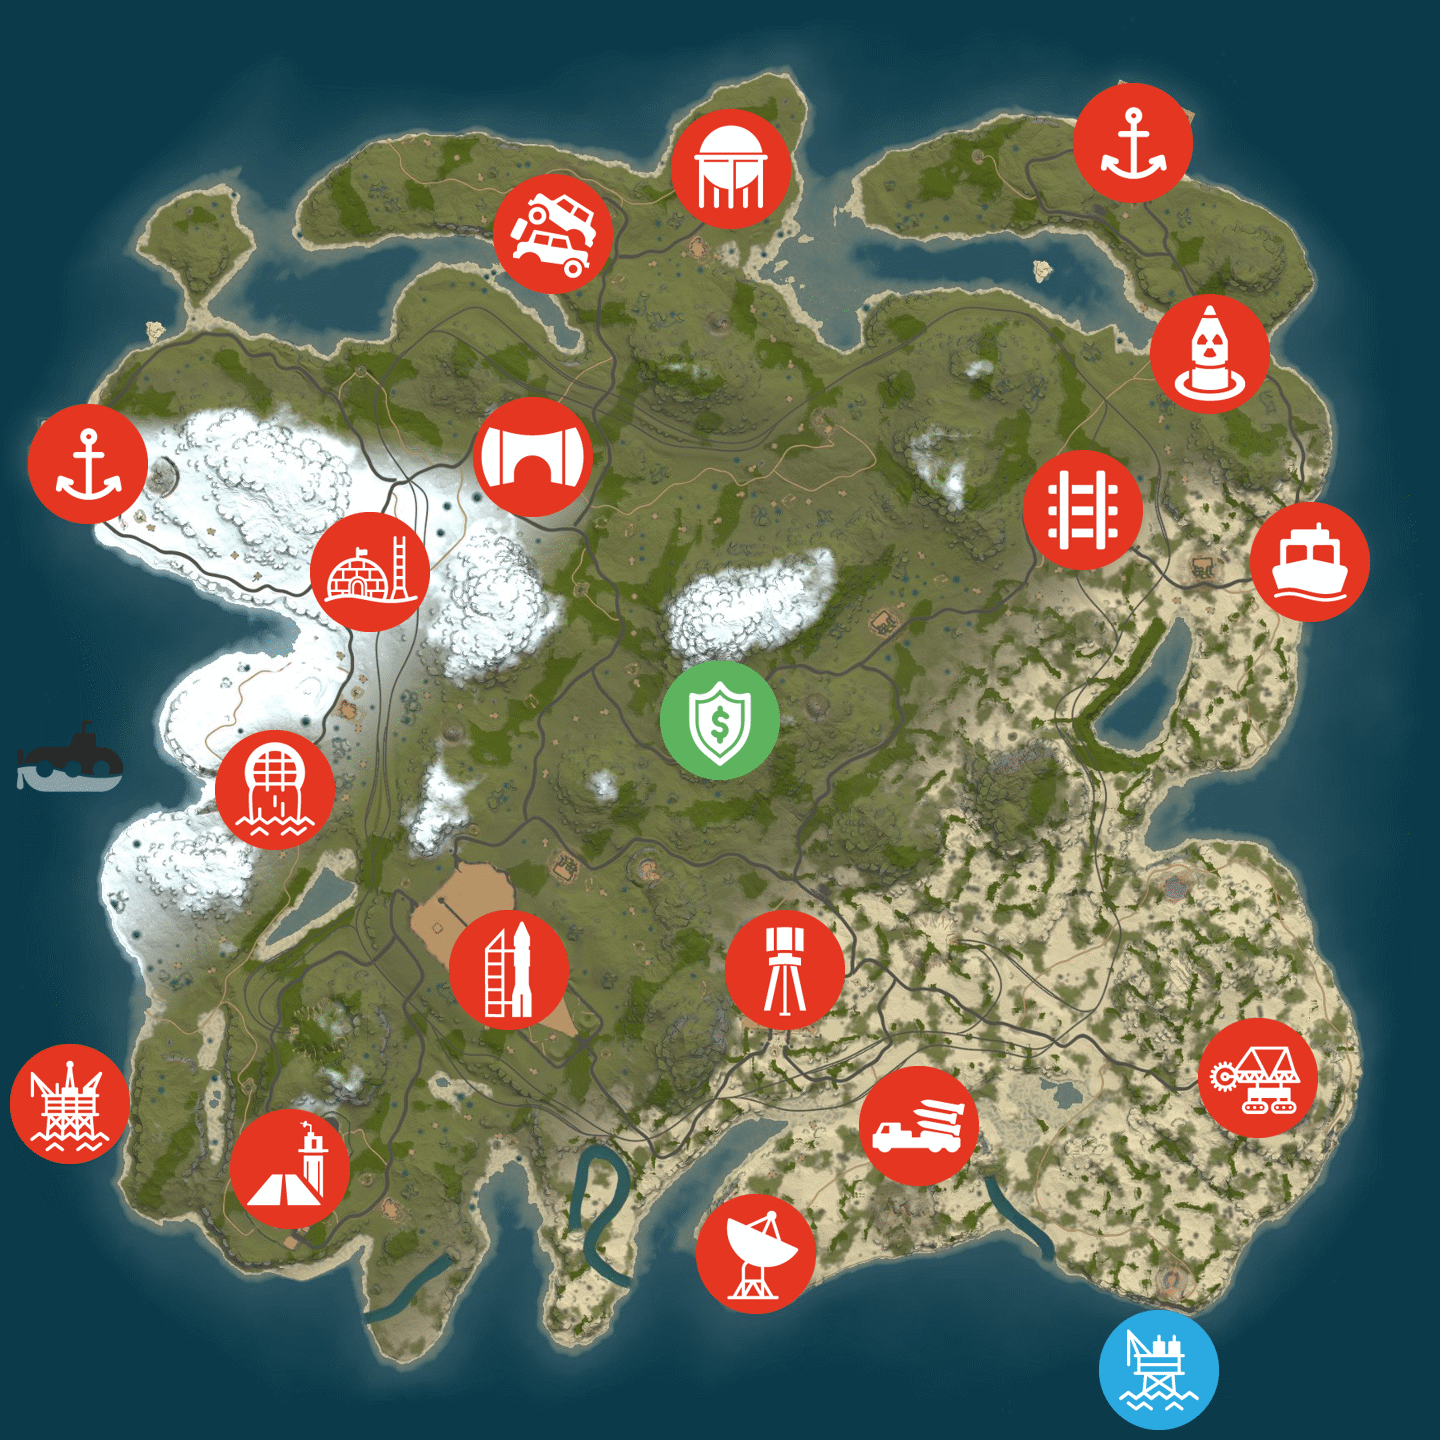 Map Preview